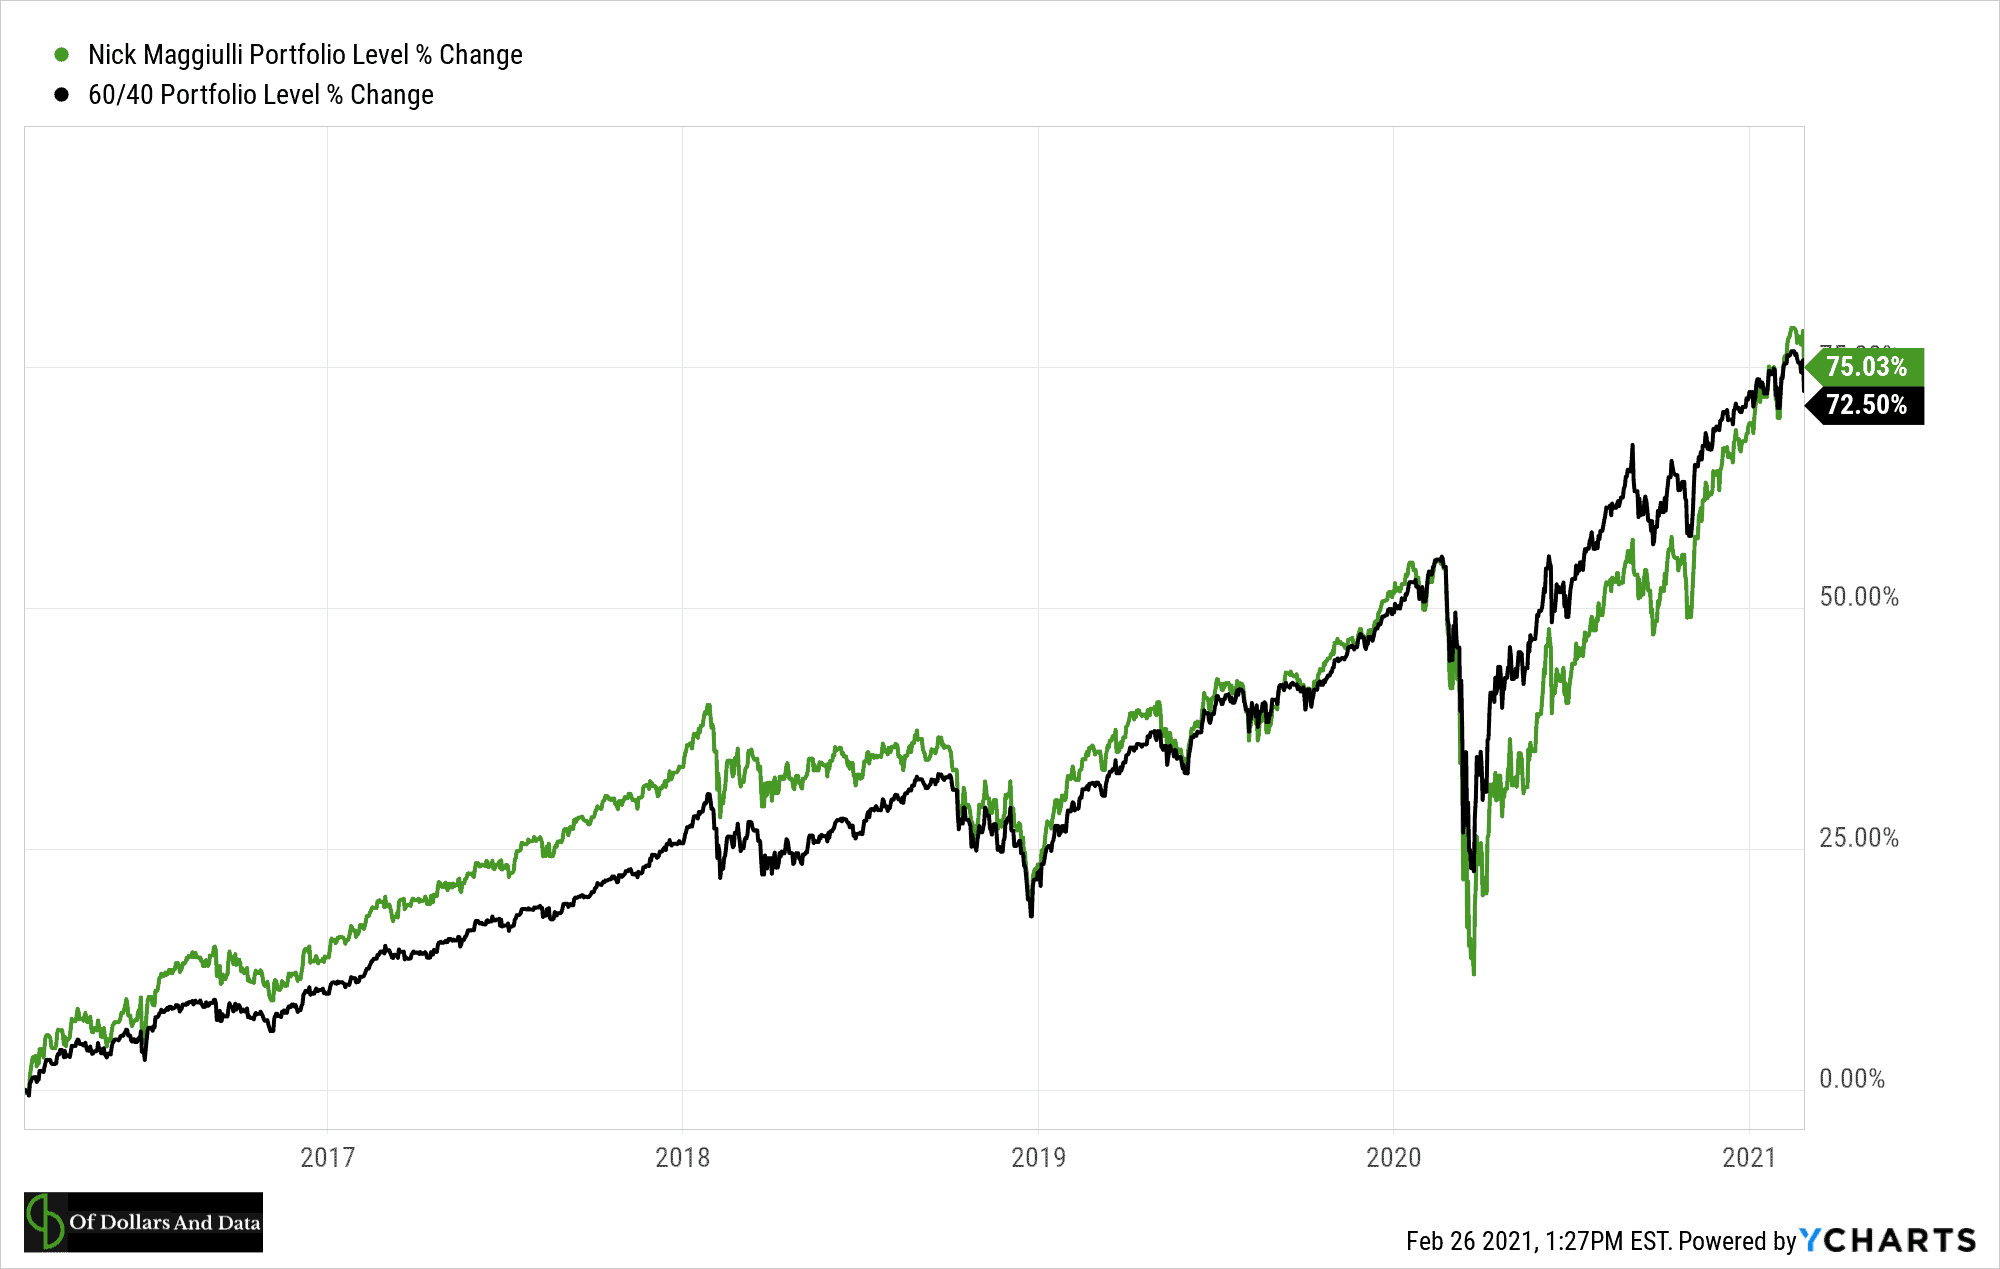 Performance of Nick Maggiulli portfolio vs a 60/40 from 2016 to 2021.